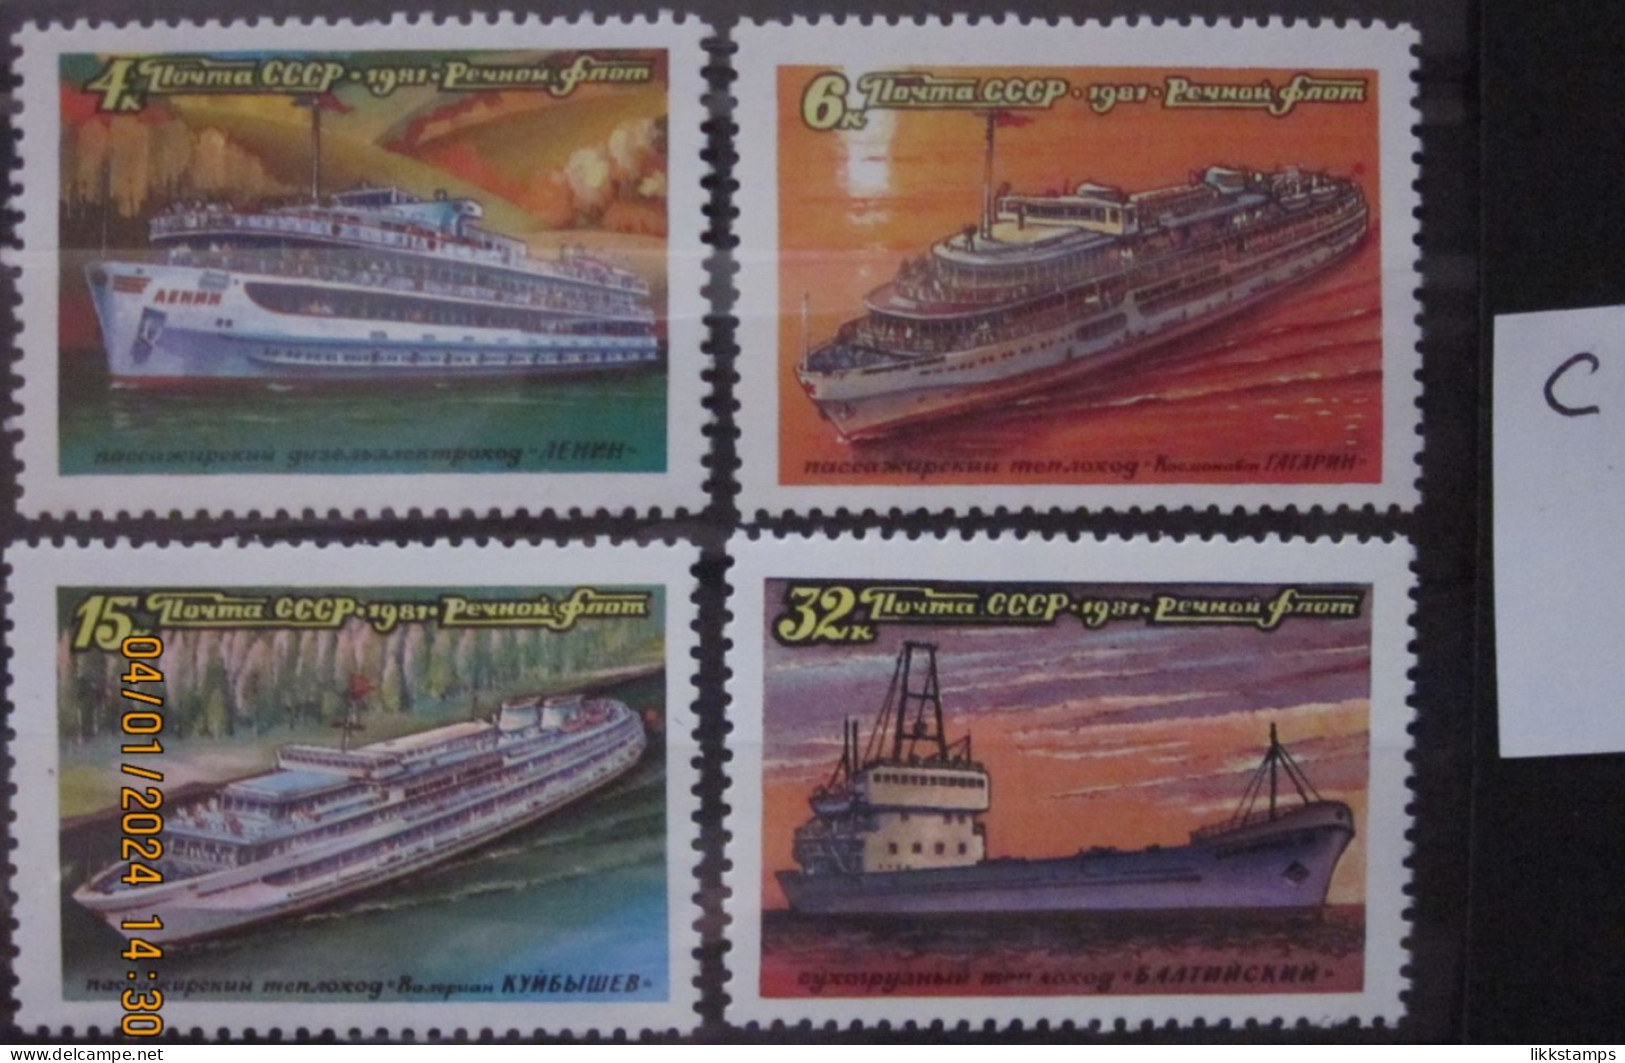 RUSSIA ~ 1981 ~ S.G. NUMBERS 5143 - 5146, ~ 'LOT C' ~ RIVER SHIPS. ~ MNH #03621 - Unused Stamps